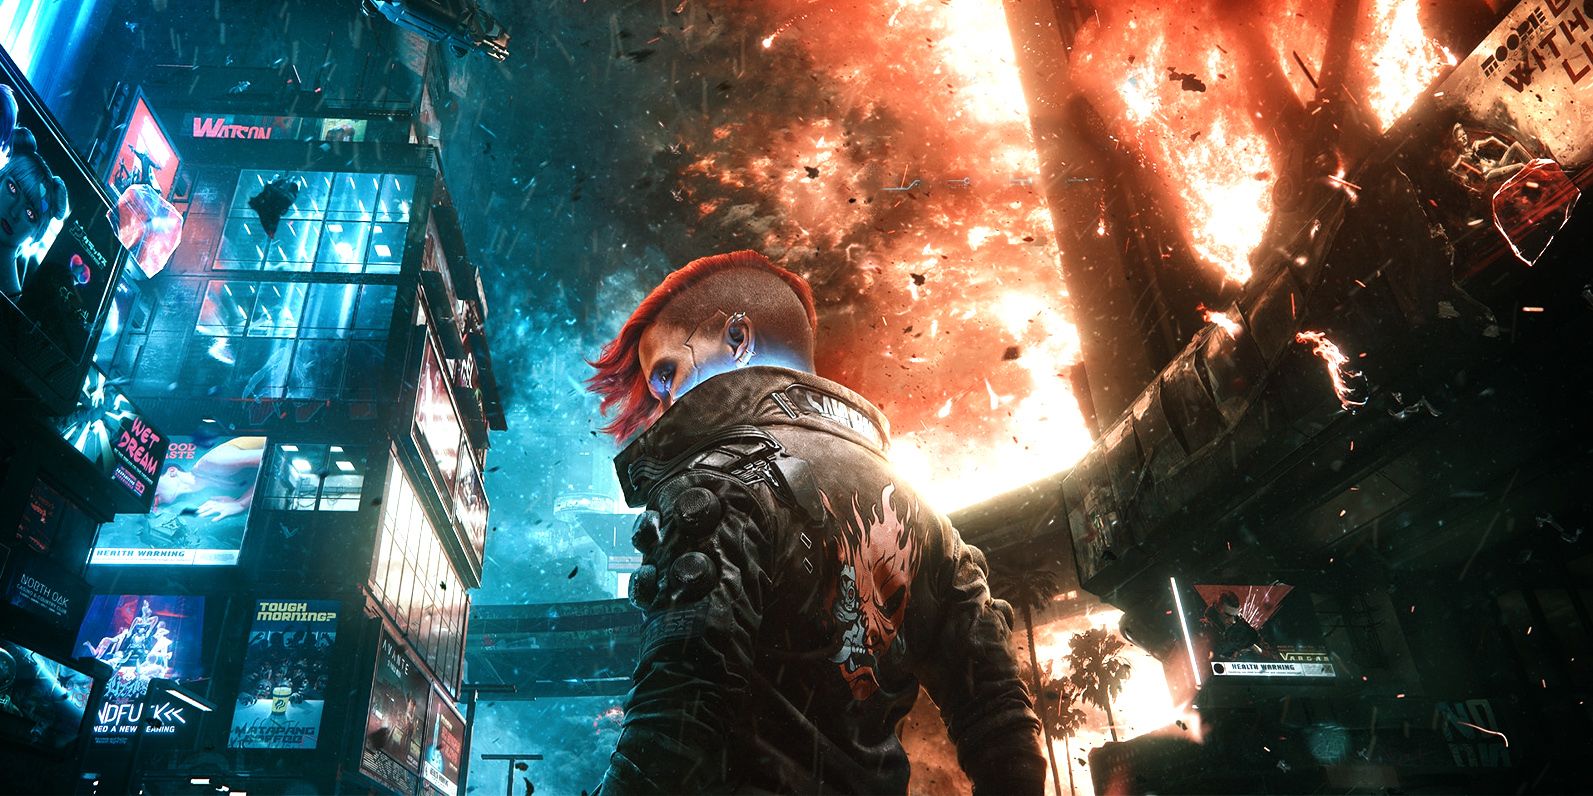 Art of V from Cyberpunk 2077 standing in Night City, with one half illuminated in blue lighting and the other half engulfed in flames.